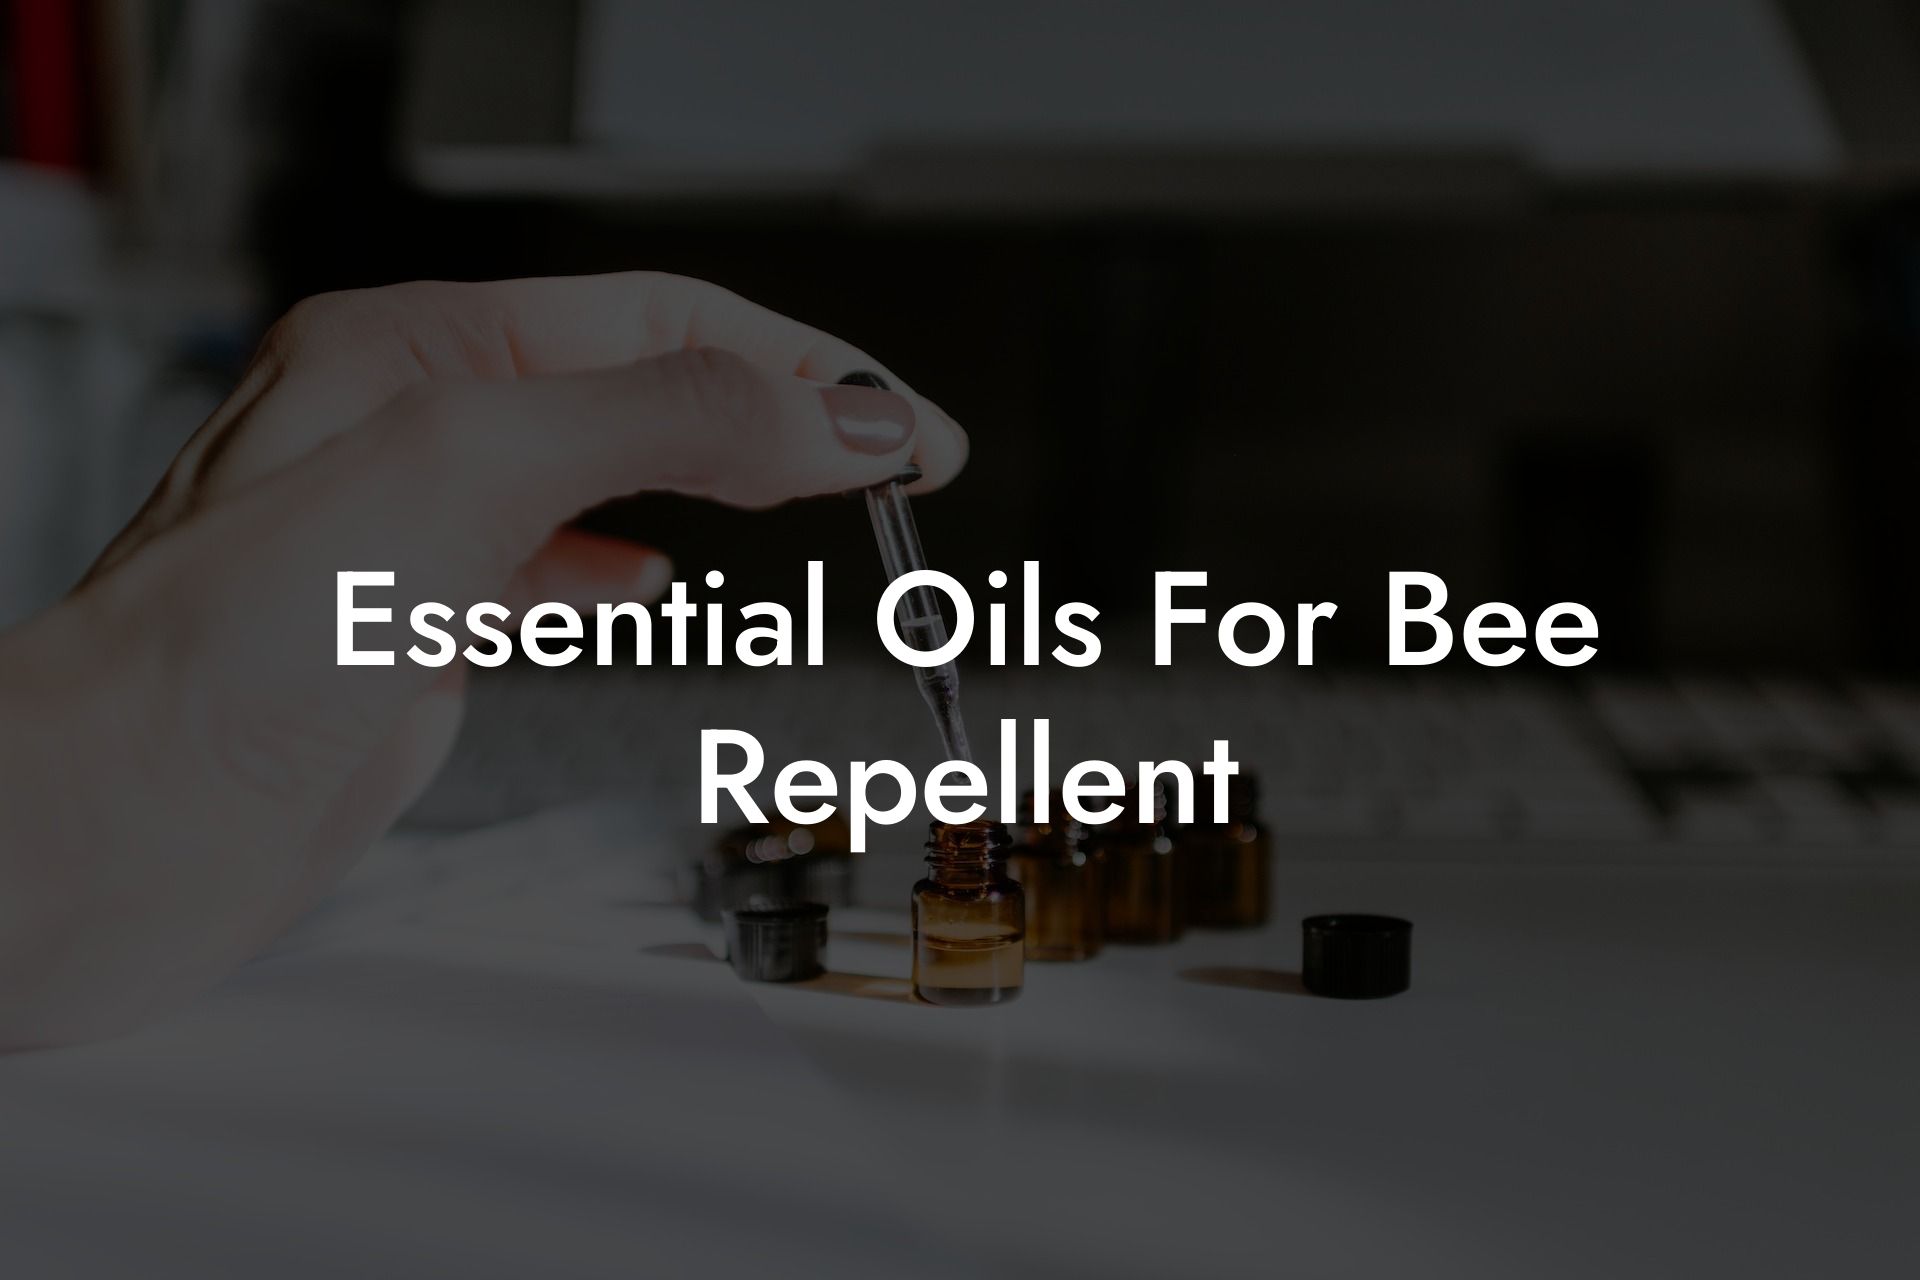 Essential Oils For Bee Repellent